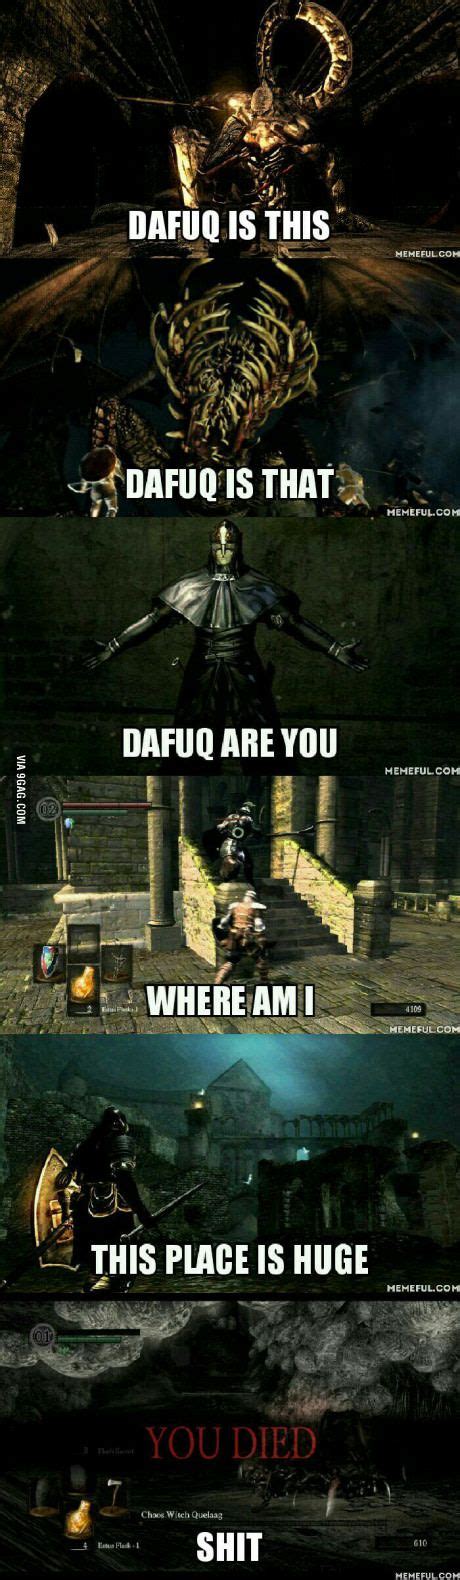 My First Experience With Dark Souls So Far Funny Dark Souls Funny Dark Souls Meme Dark Souls